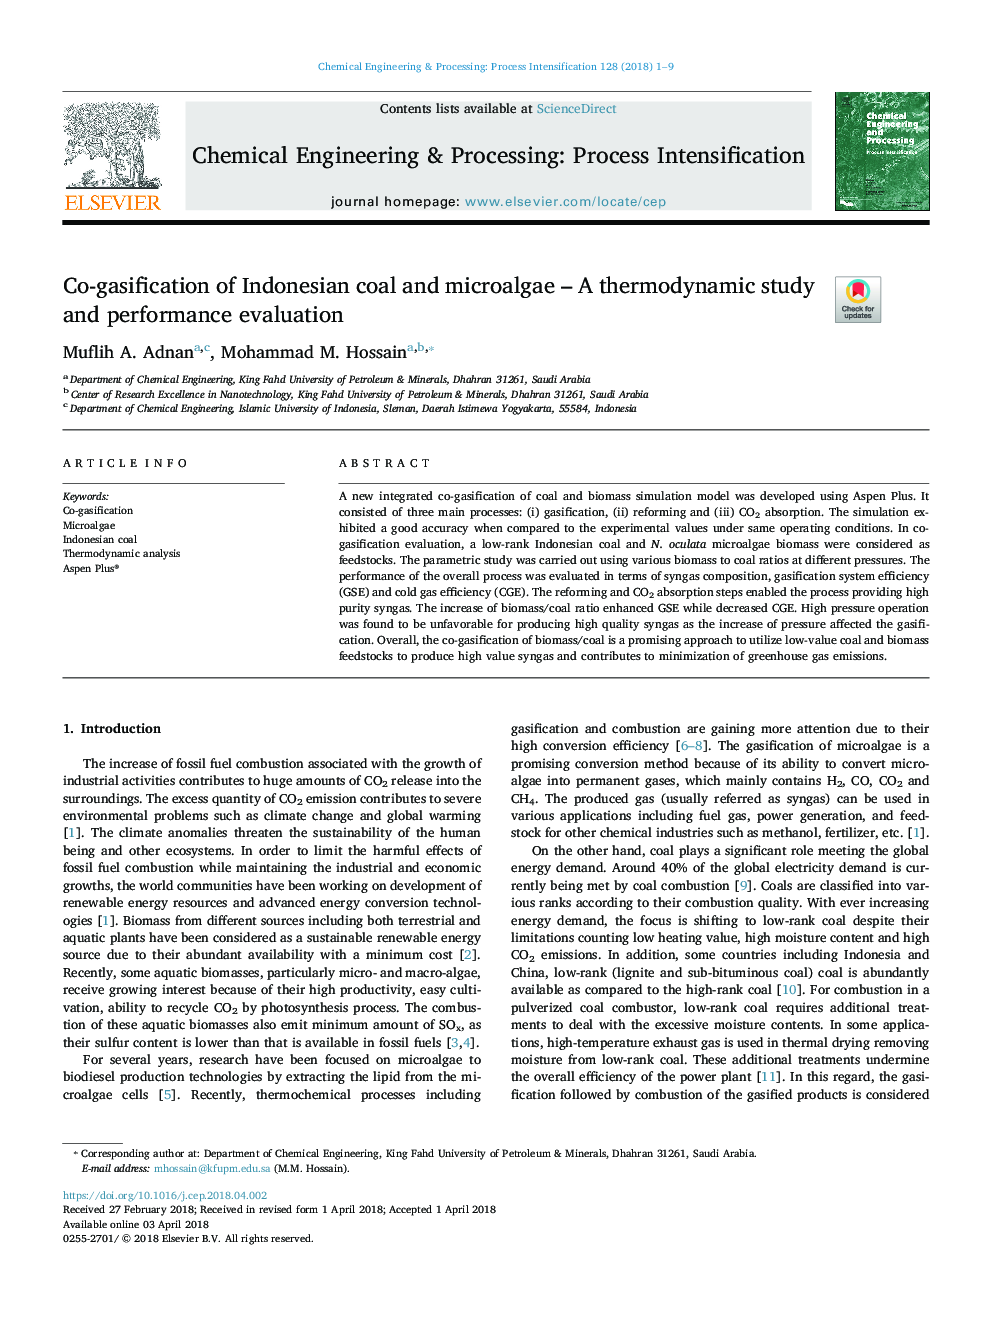 Co-gasification of Indonesian coal and microalgae - A thermodynamic study and performance evaluation